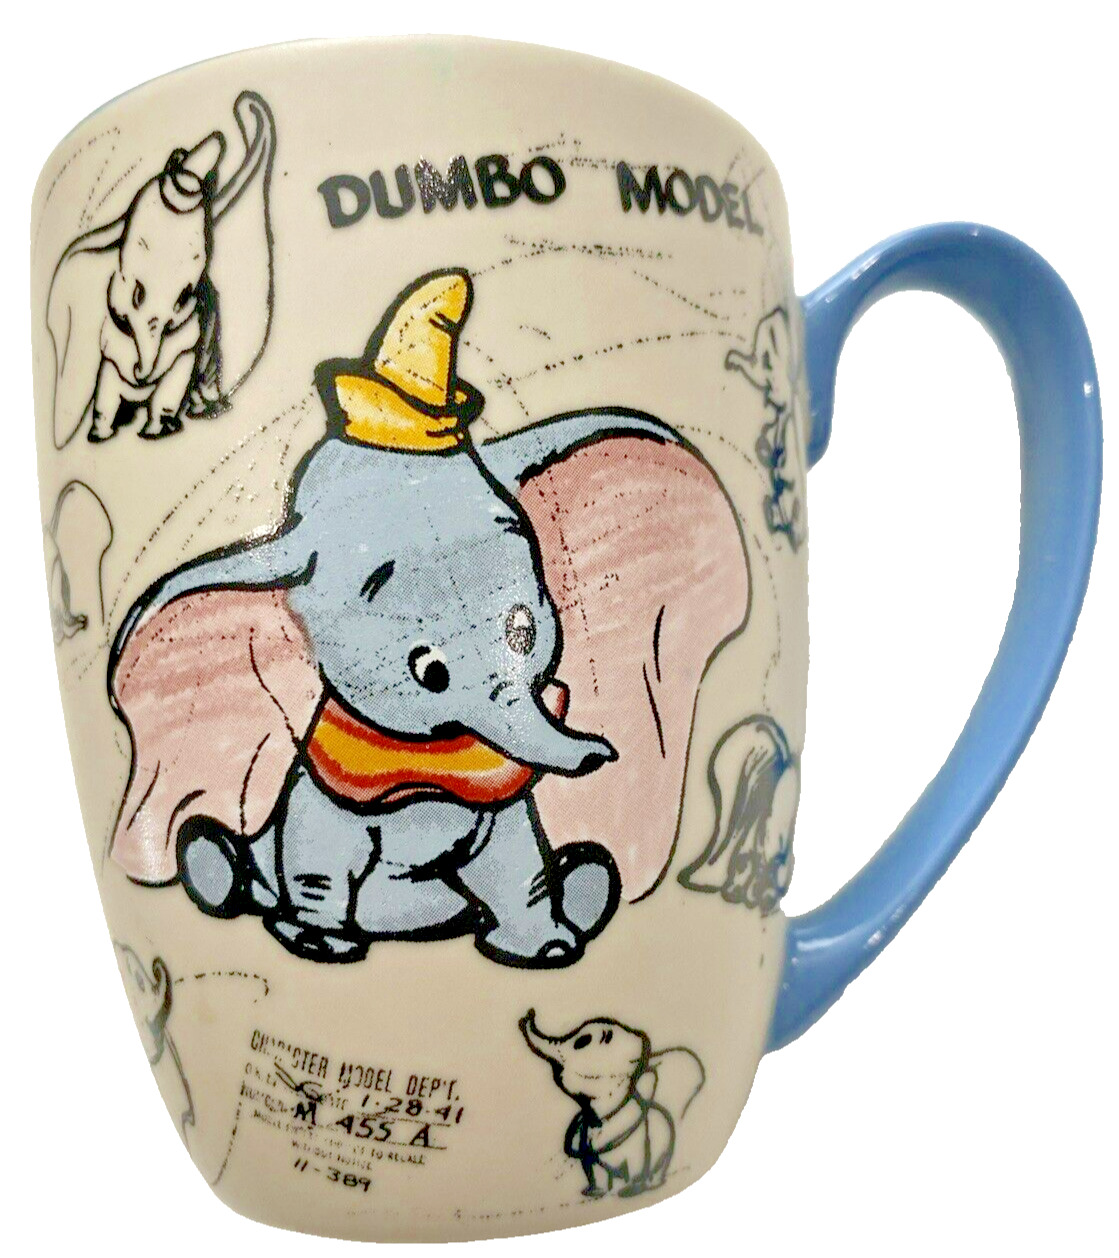 Disney Store Dumbo Coffee Cup Mug Sketch Images Style Blue Inside White Outside